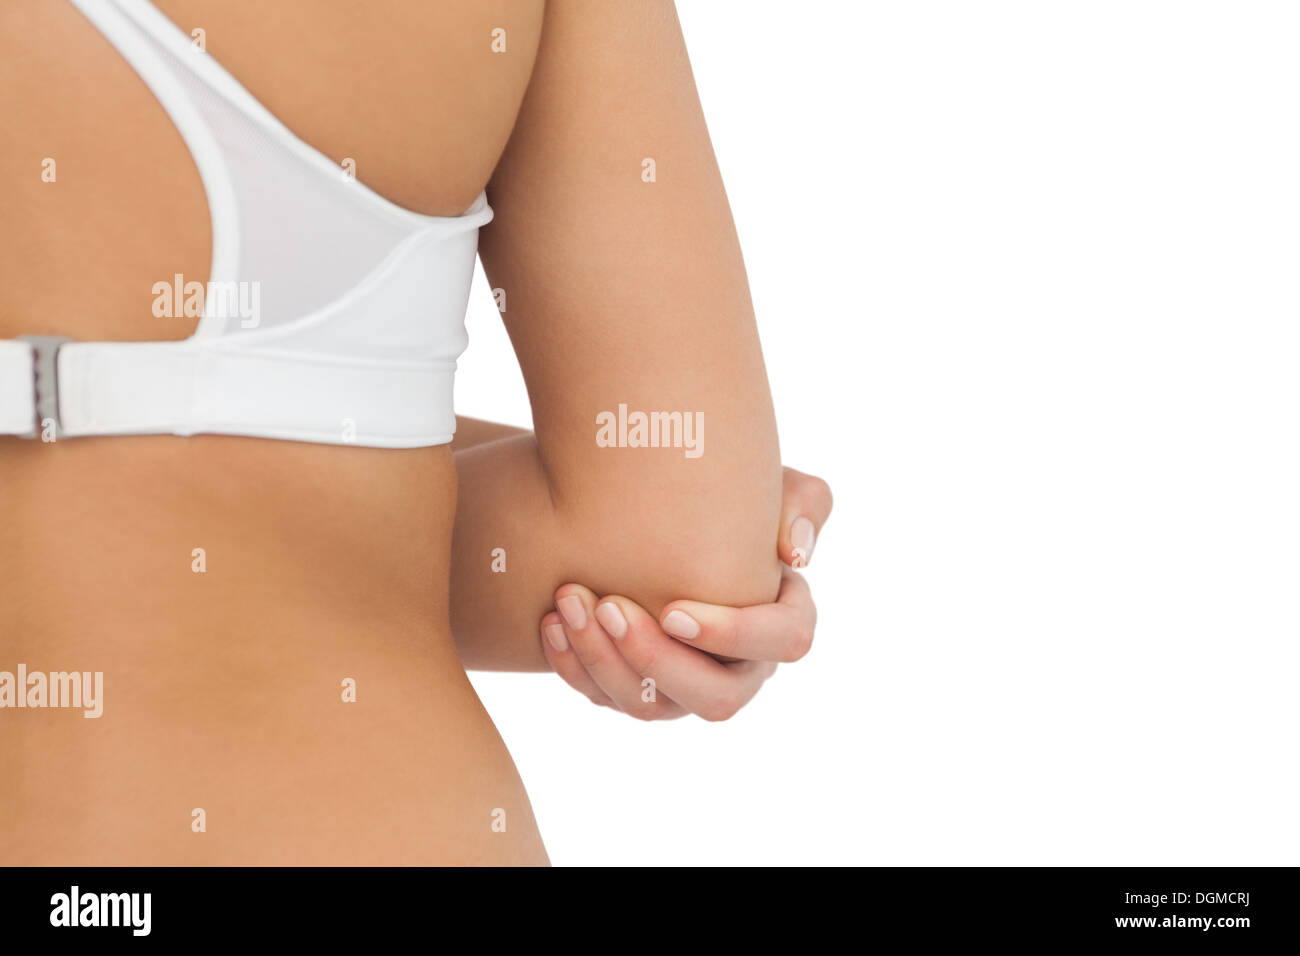 Rear view of young woman touching her injured elbow Stock Photo